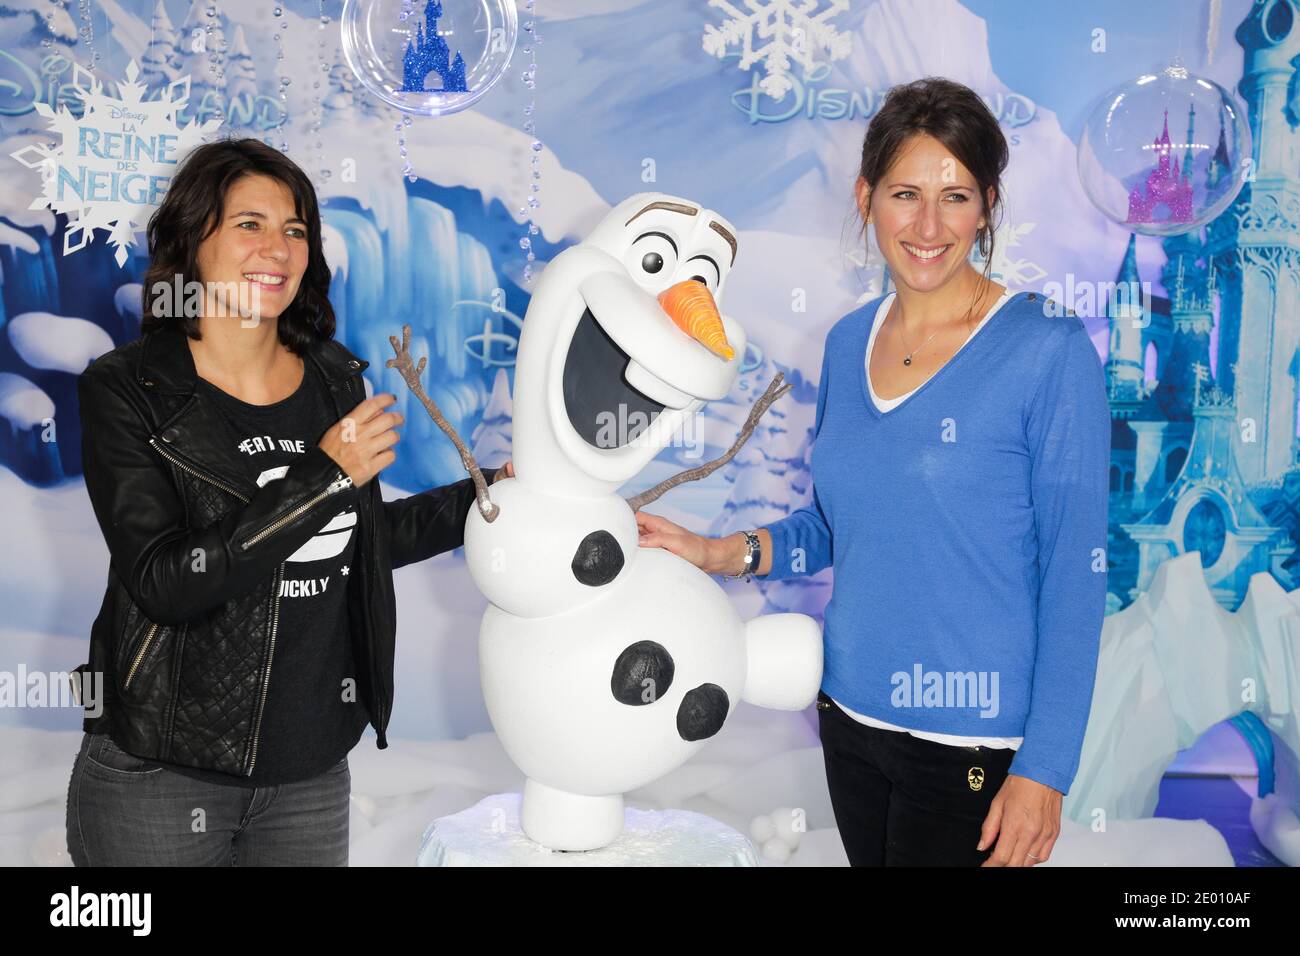 Estelle Denis and Maud Fontenoy attending the Christmas Season opening day at Disneyland Resort Paris in Marne-La-Vallee, France, on November 09, 2013. Photo by Jerome Domine/ABACAPRESS.COM Stock Photo